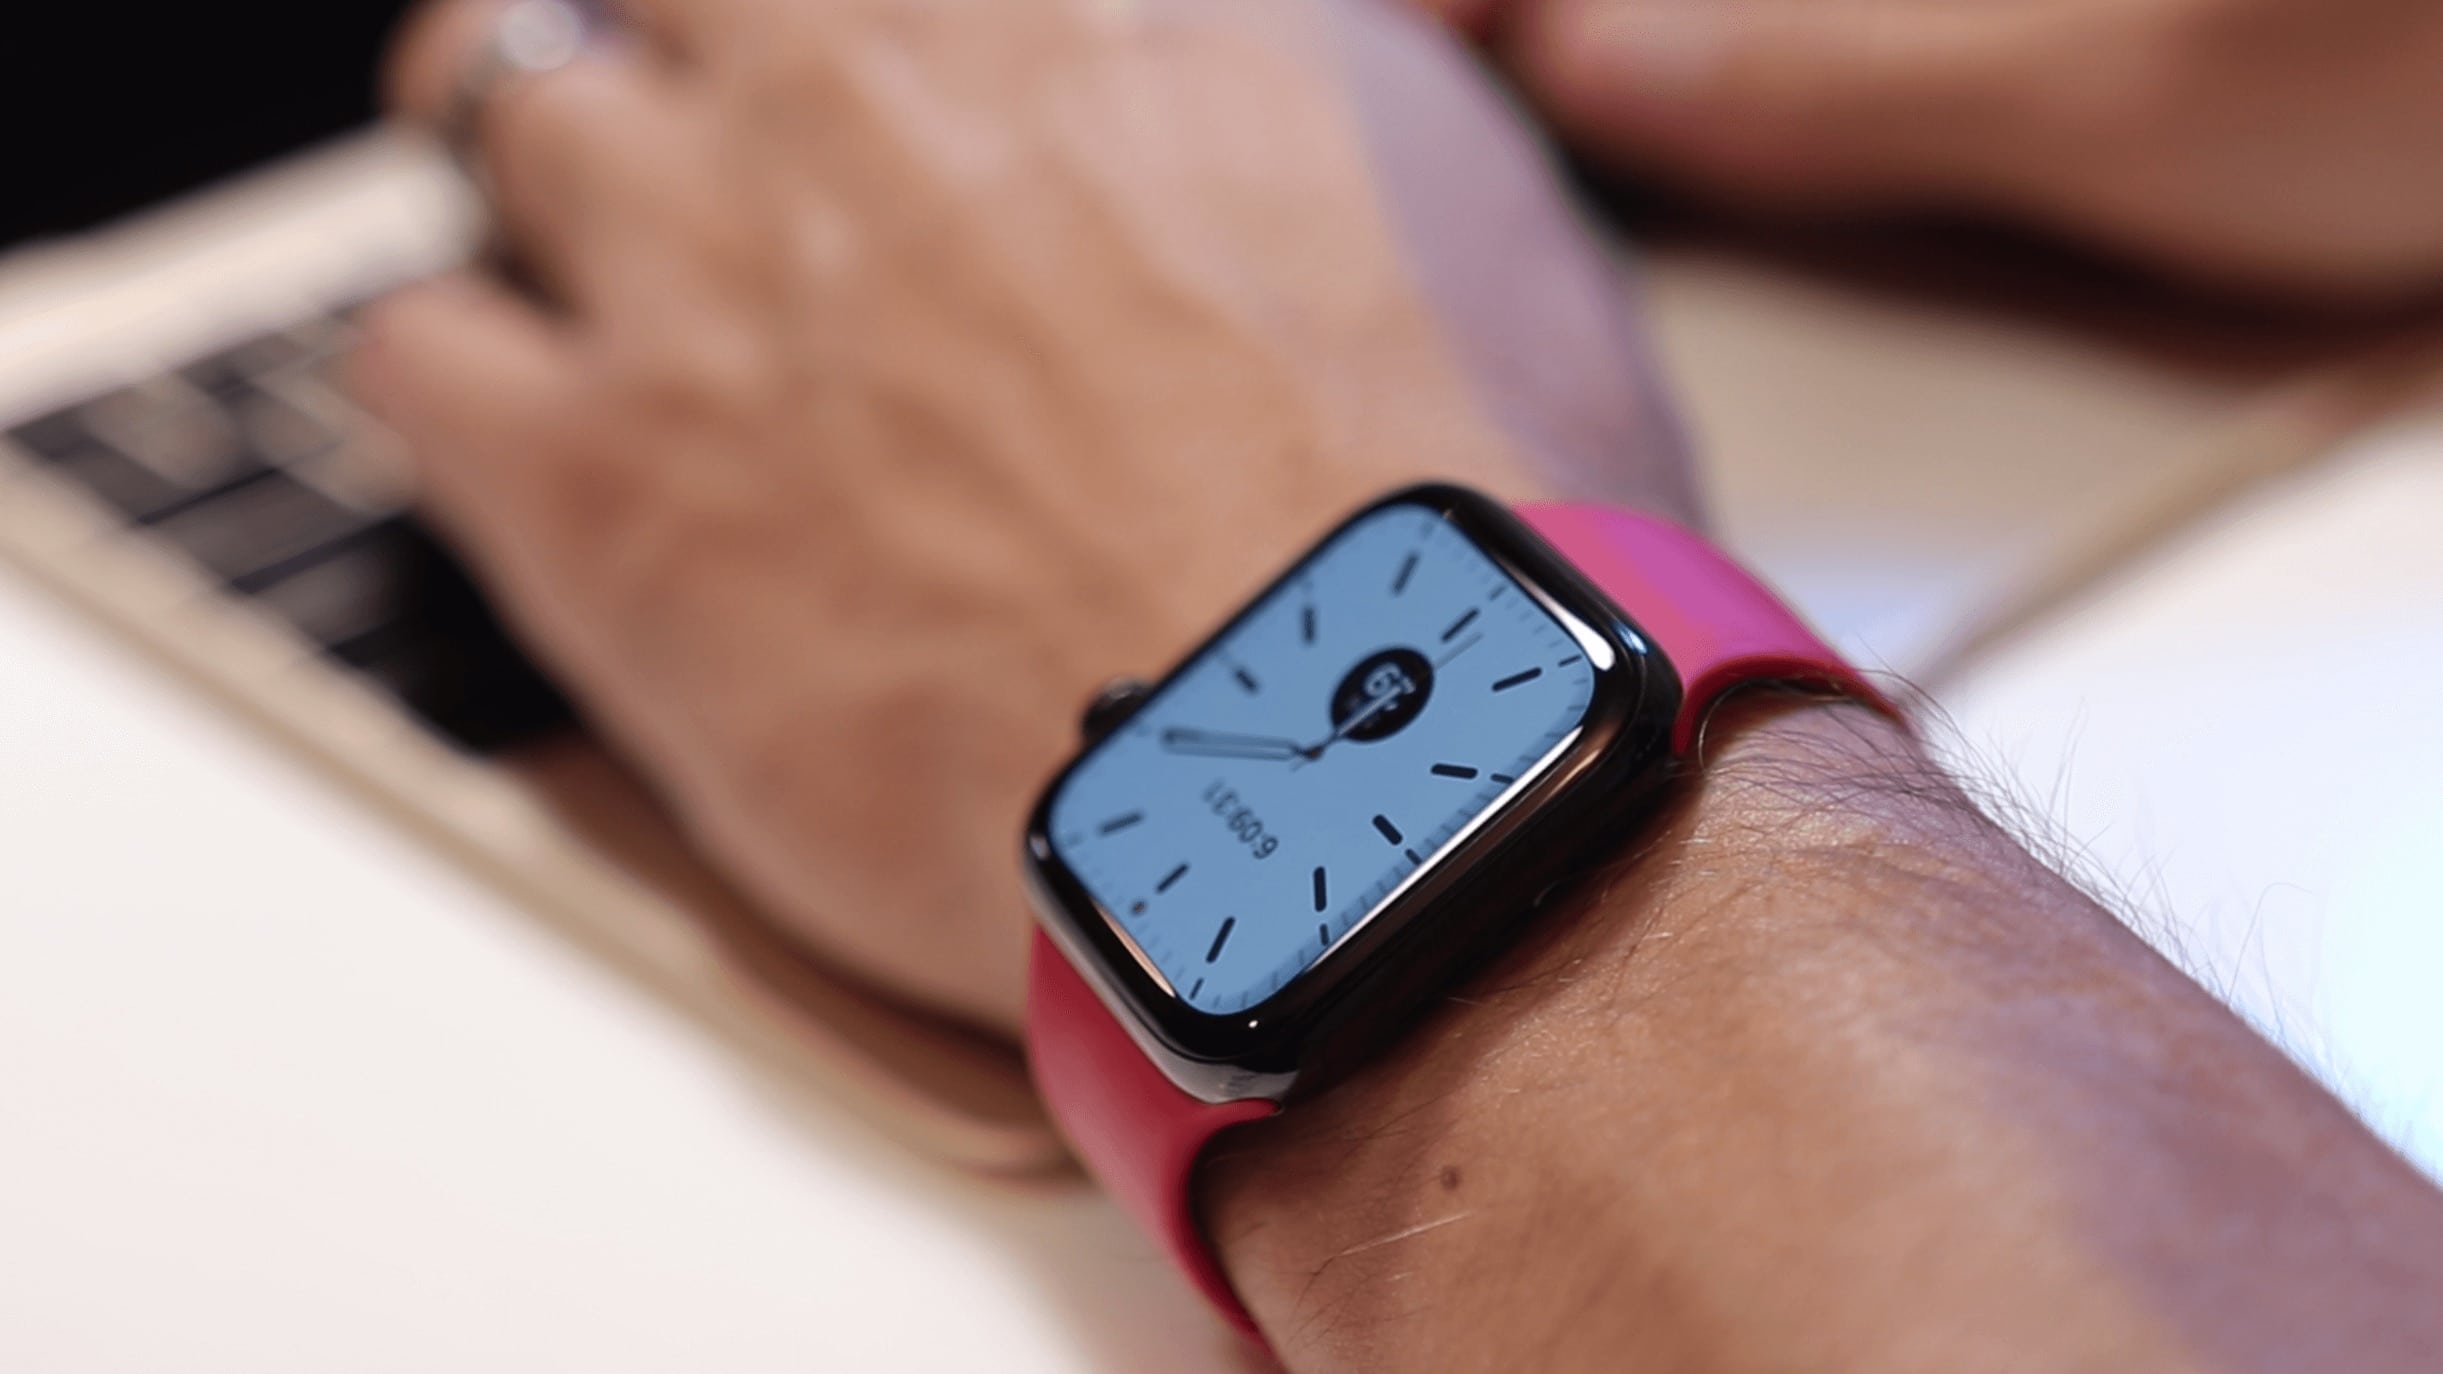 Apple Watch will add the ability to detect blood oxygen levels